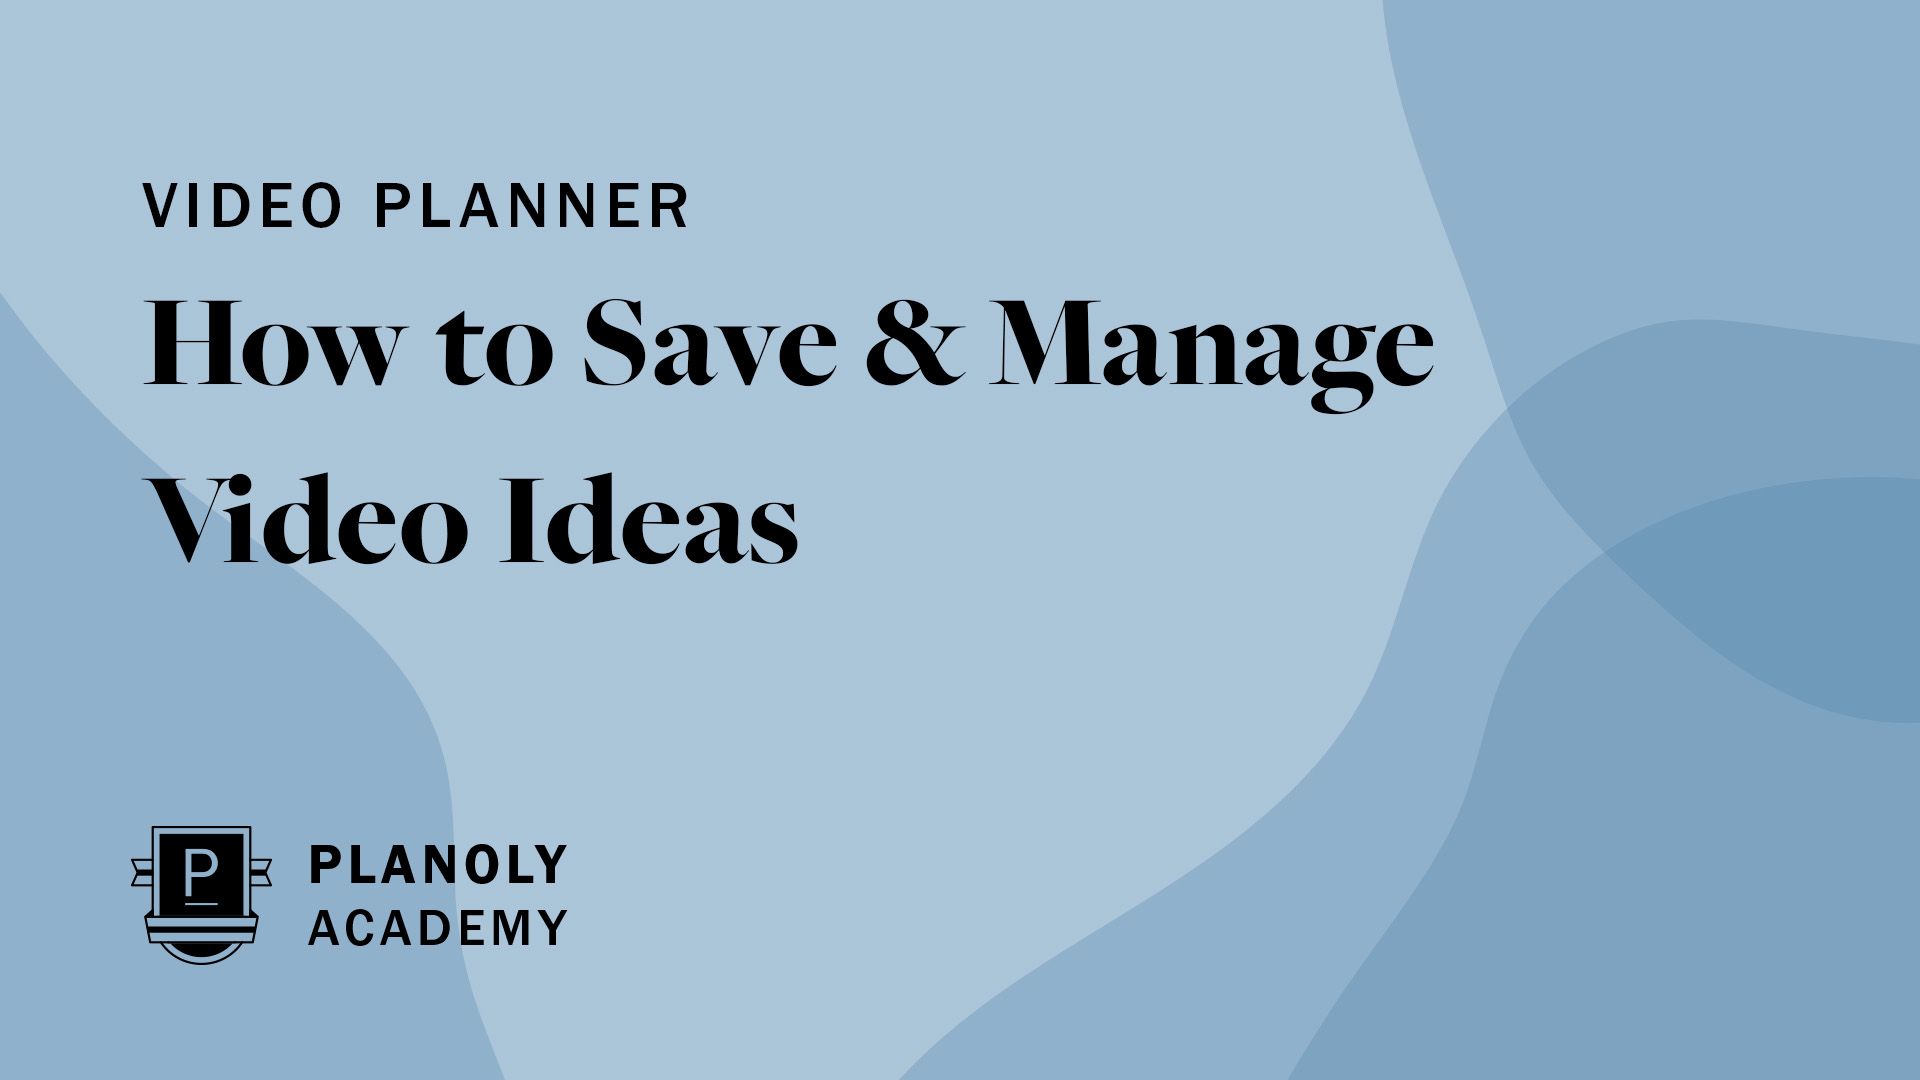 How to Save & Manage Video Ideas